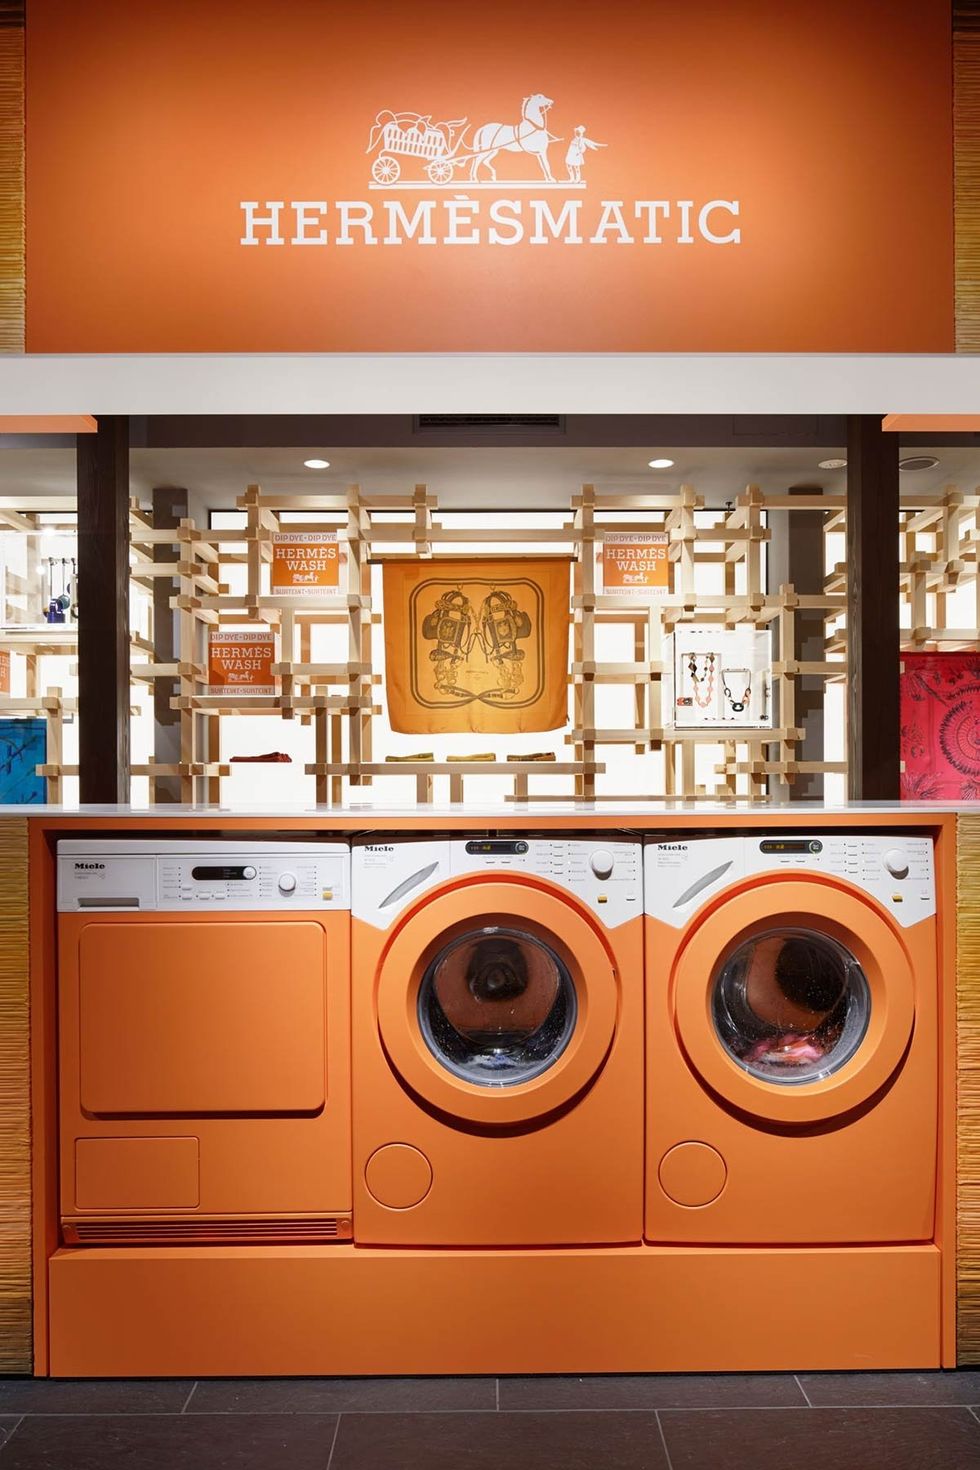 Washing machine, Clothes dryer, Major appliance, Orange, Amber, Home appliance, Colorfulness, Laundry room, Laundry, Circle, 